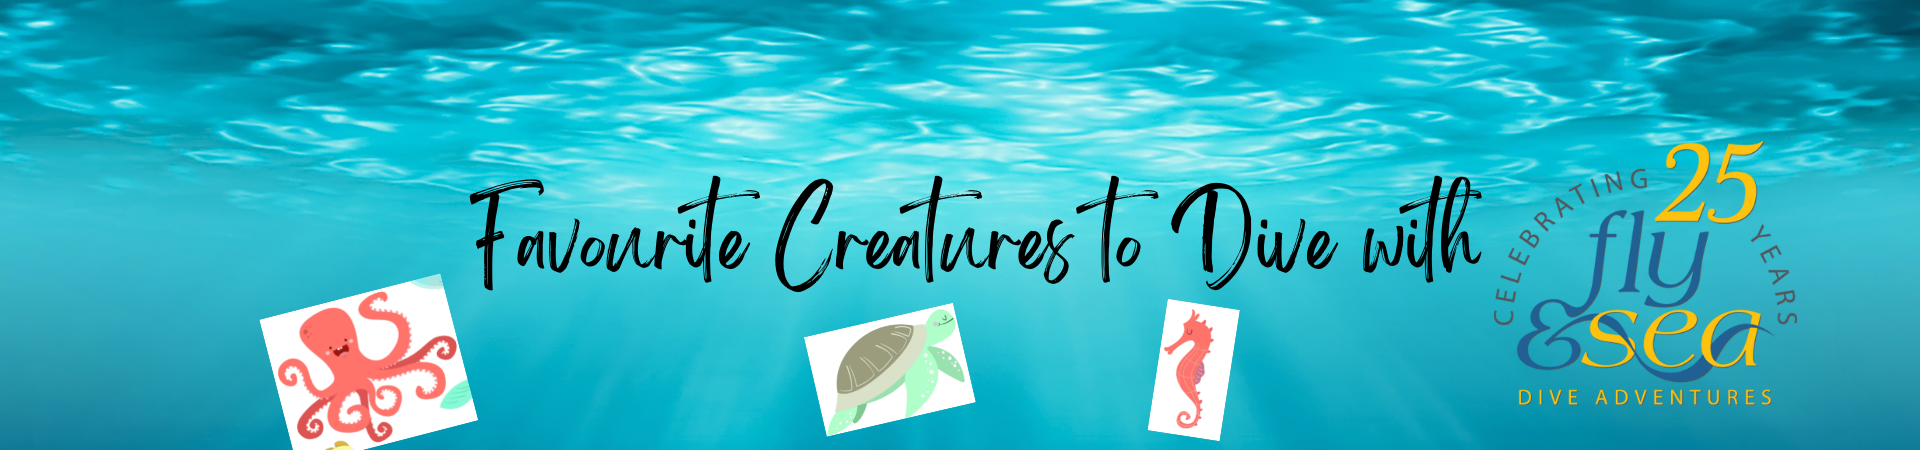 Favourite Creatures to dive with